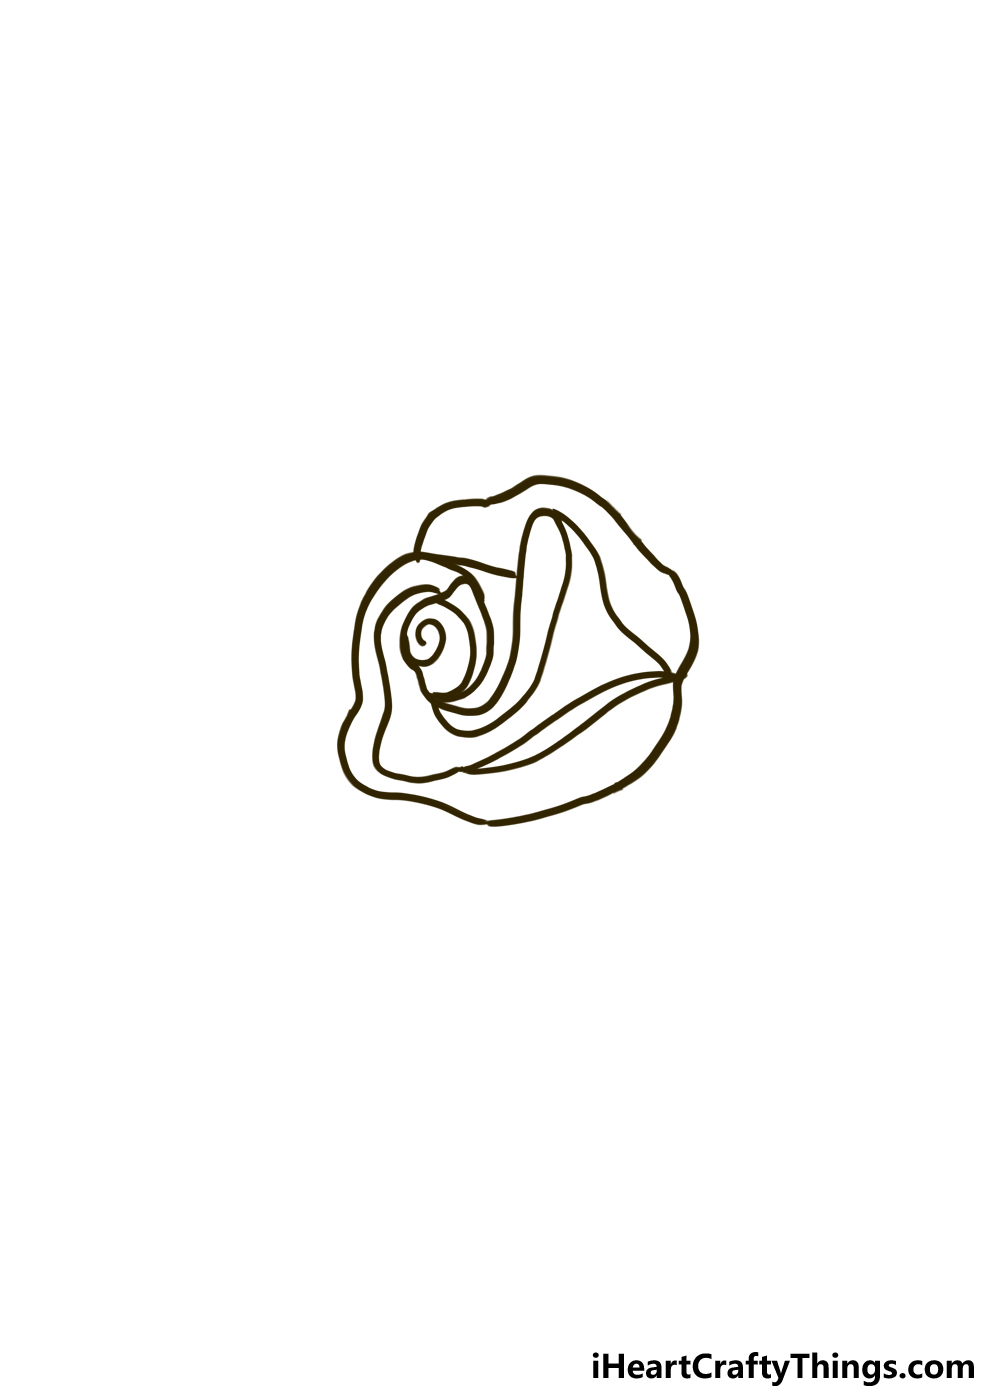 How to Draw A Rose Tattoo step 3